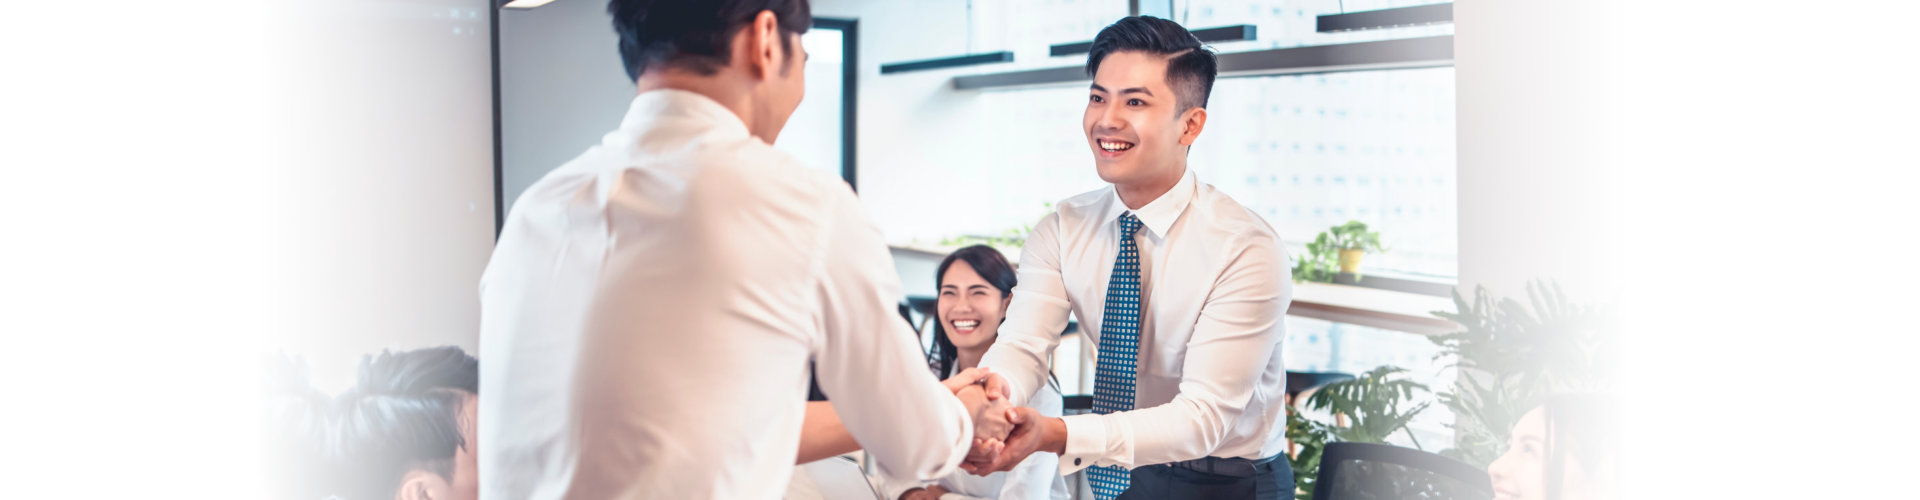 happy business people shaking hands in conference room